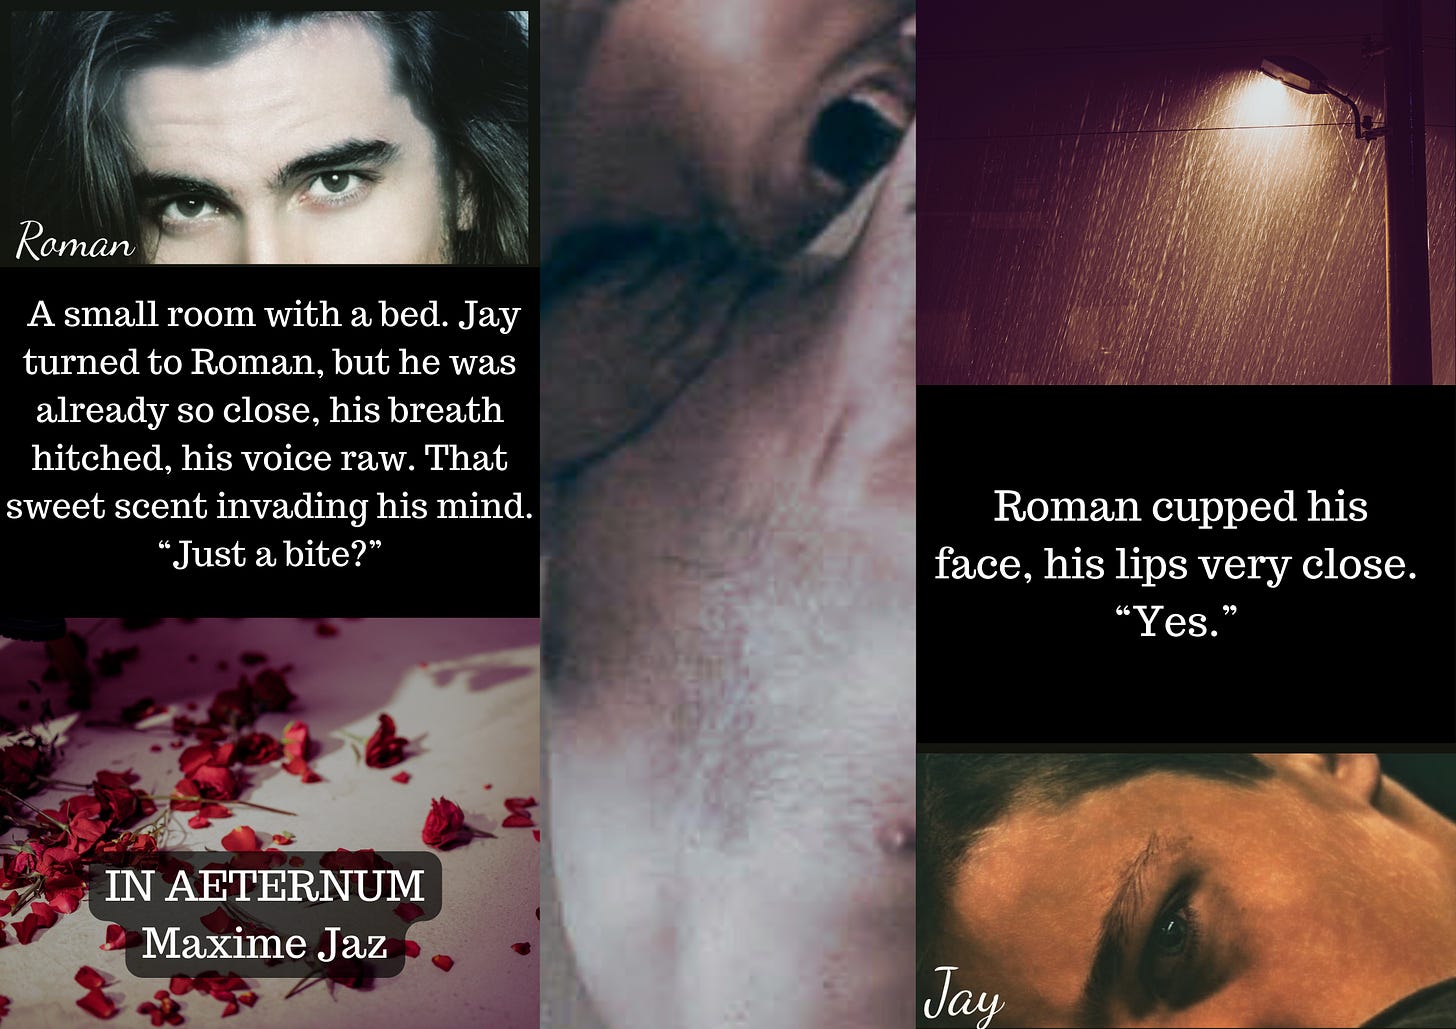 Moodboard for my vampire novel. Pic collage on black background. 2 pics on the right and a quote in the middle. A man's dark eyes with long black hair, caption Roman. Quote: A small room with a bed. jay turned to Roman, but he was already so close, his breath hitched, his voice raw. That sweet scent invading his mind. "Just a bite?" A bed with red rose petals on it. Maxime Jaz in white font. Middle pic is a man's mouth wide open on another man's neck, teeth showing.  Left pics. A street lamp in the rain, purple colors. Quote: Roman cupped his face, his lips close. "Yes" A young man's grey eye, caption Jay.